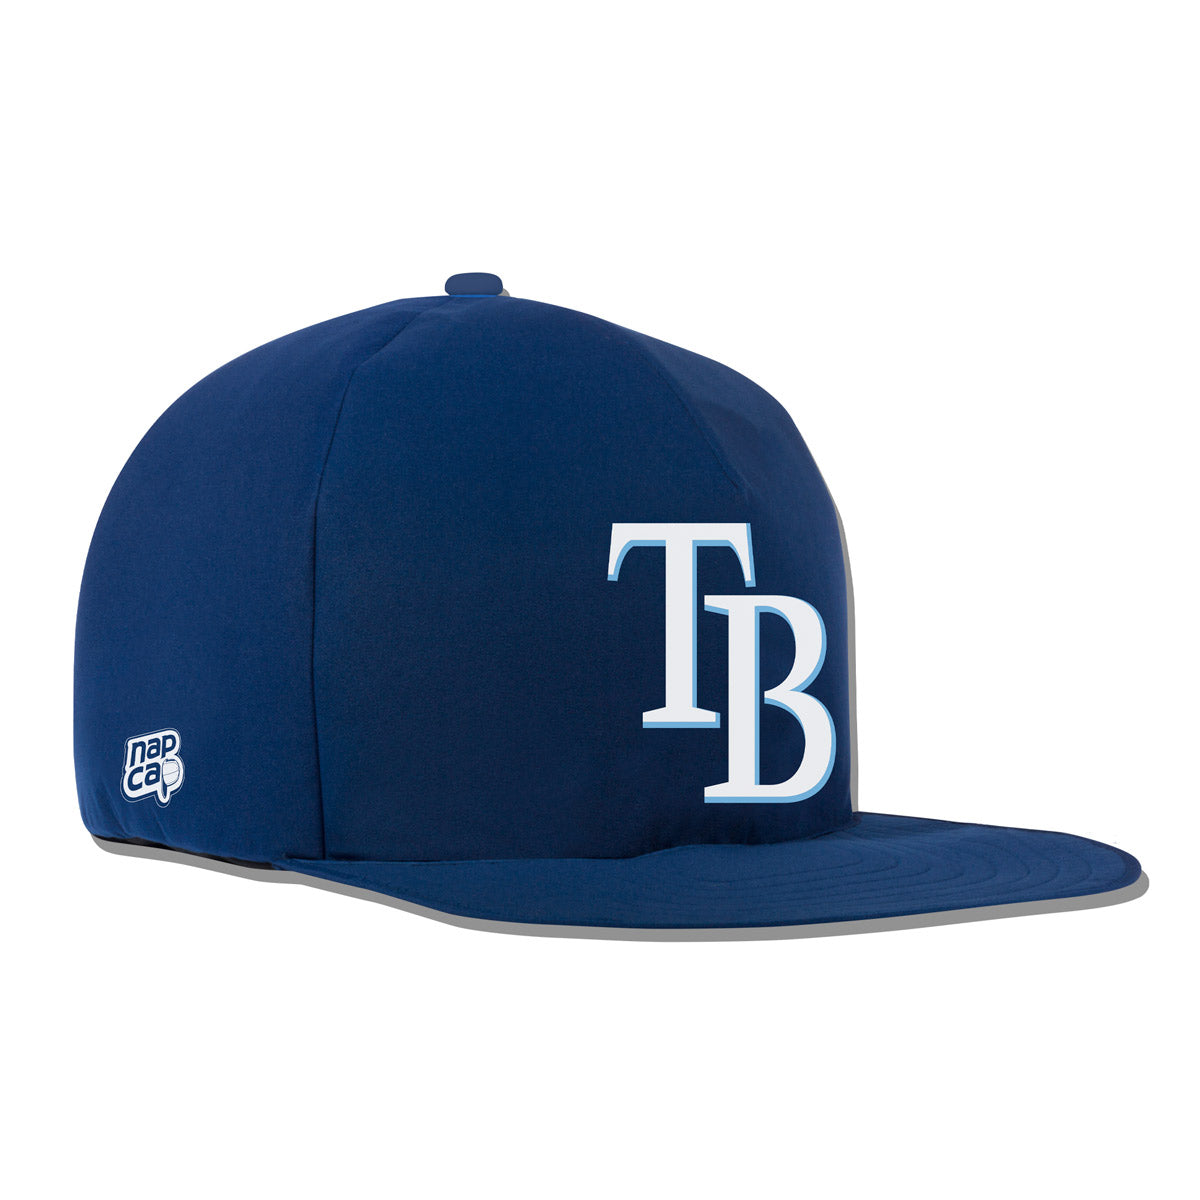 Official Tampa Bay Rays Baseball Hats, Rays Caps, Rays Hat